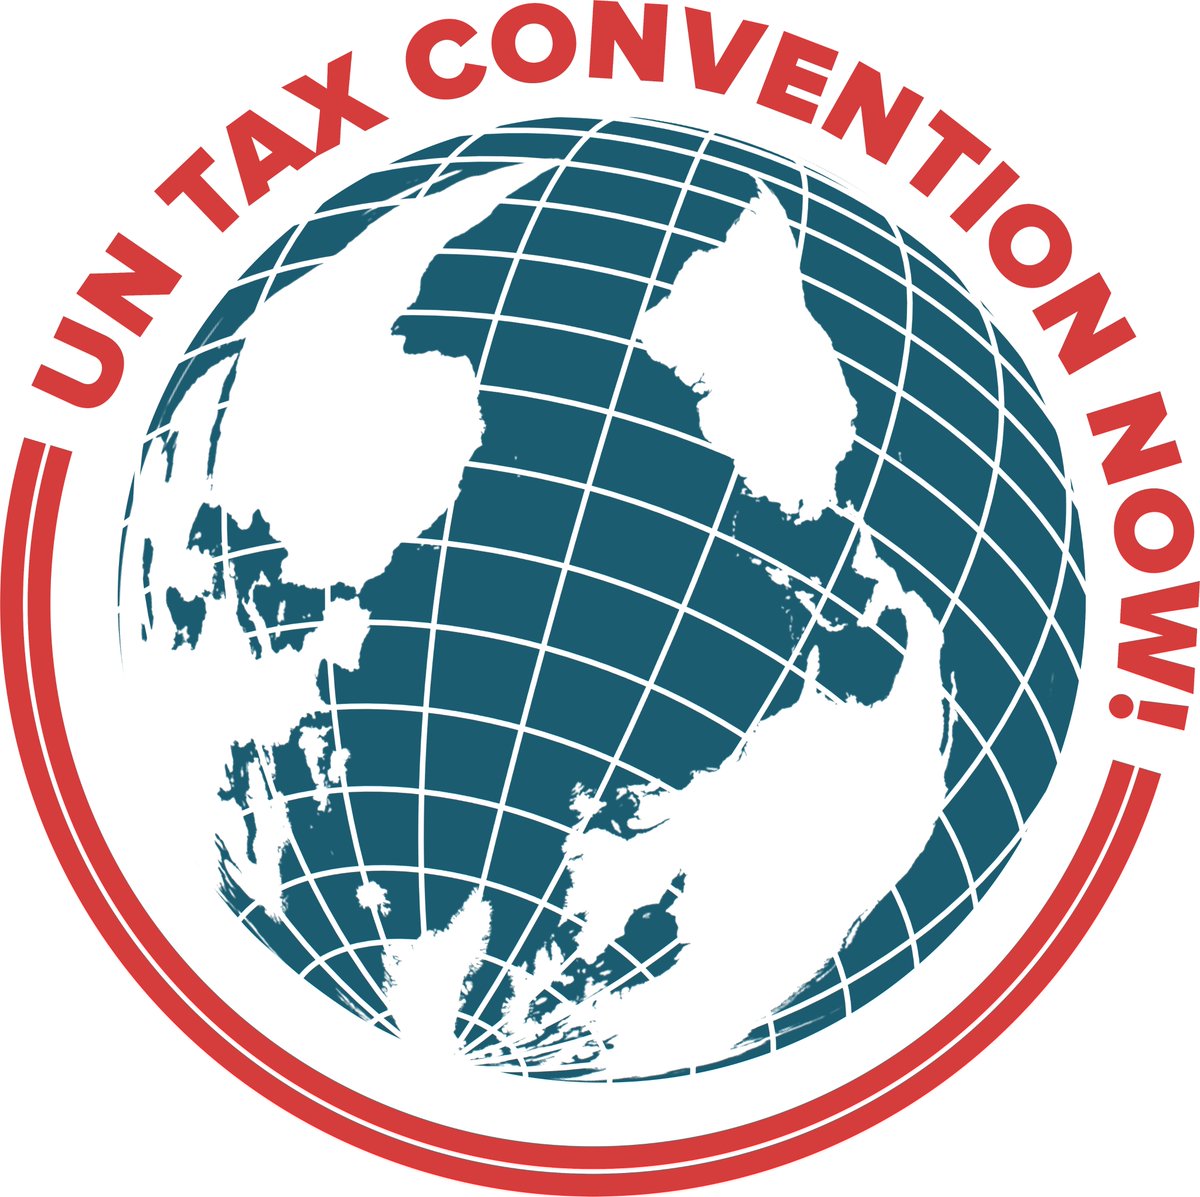 The broken international tax system lets corporations dodge taxes, shift income to #TaxHavens, and fuel IFFs, causing #GlobalSouth countries lose billions in public revenue that could finance #Education. It's time to challenge the status quo! #UNTaxConvention now! #2Committee